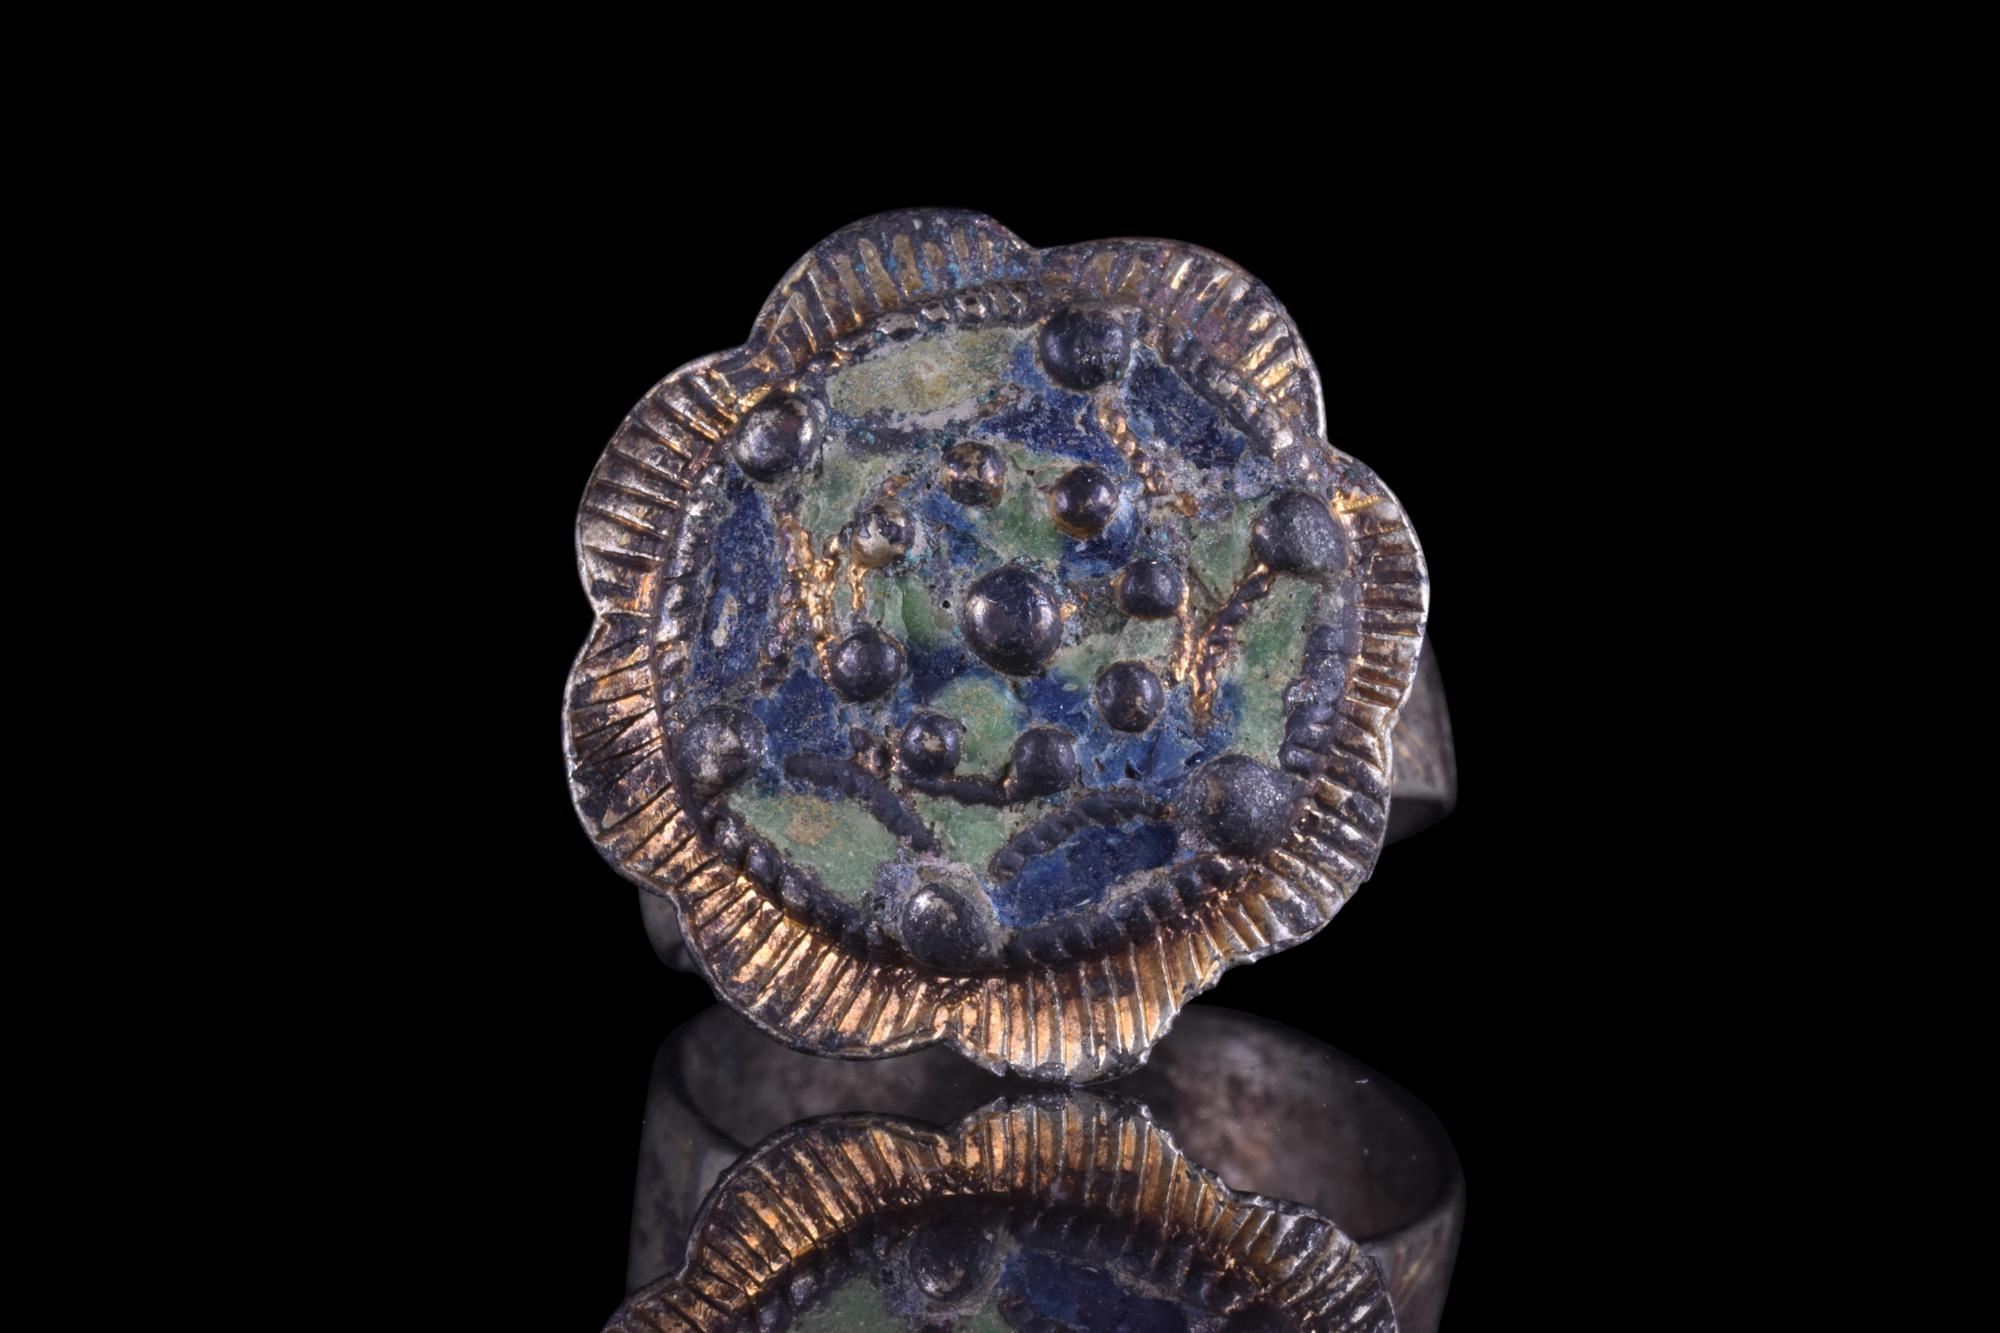 An exquisite silver gilt finger ring featuring a beautiful floral-shaped bezel with raised bosses and remnants of blue and green enamel. The ring is further embellished with several intricate details, including delicate engravings on the stepped